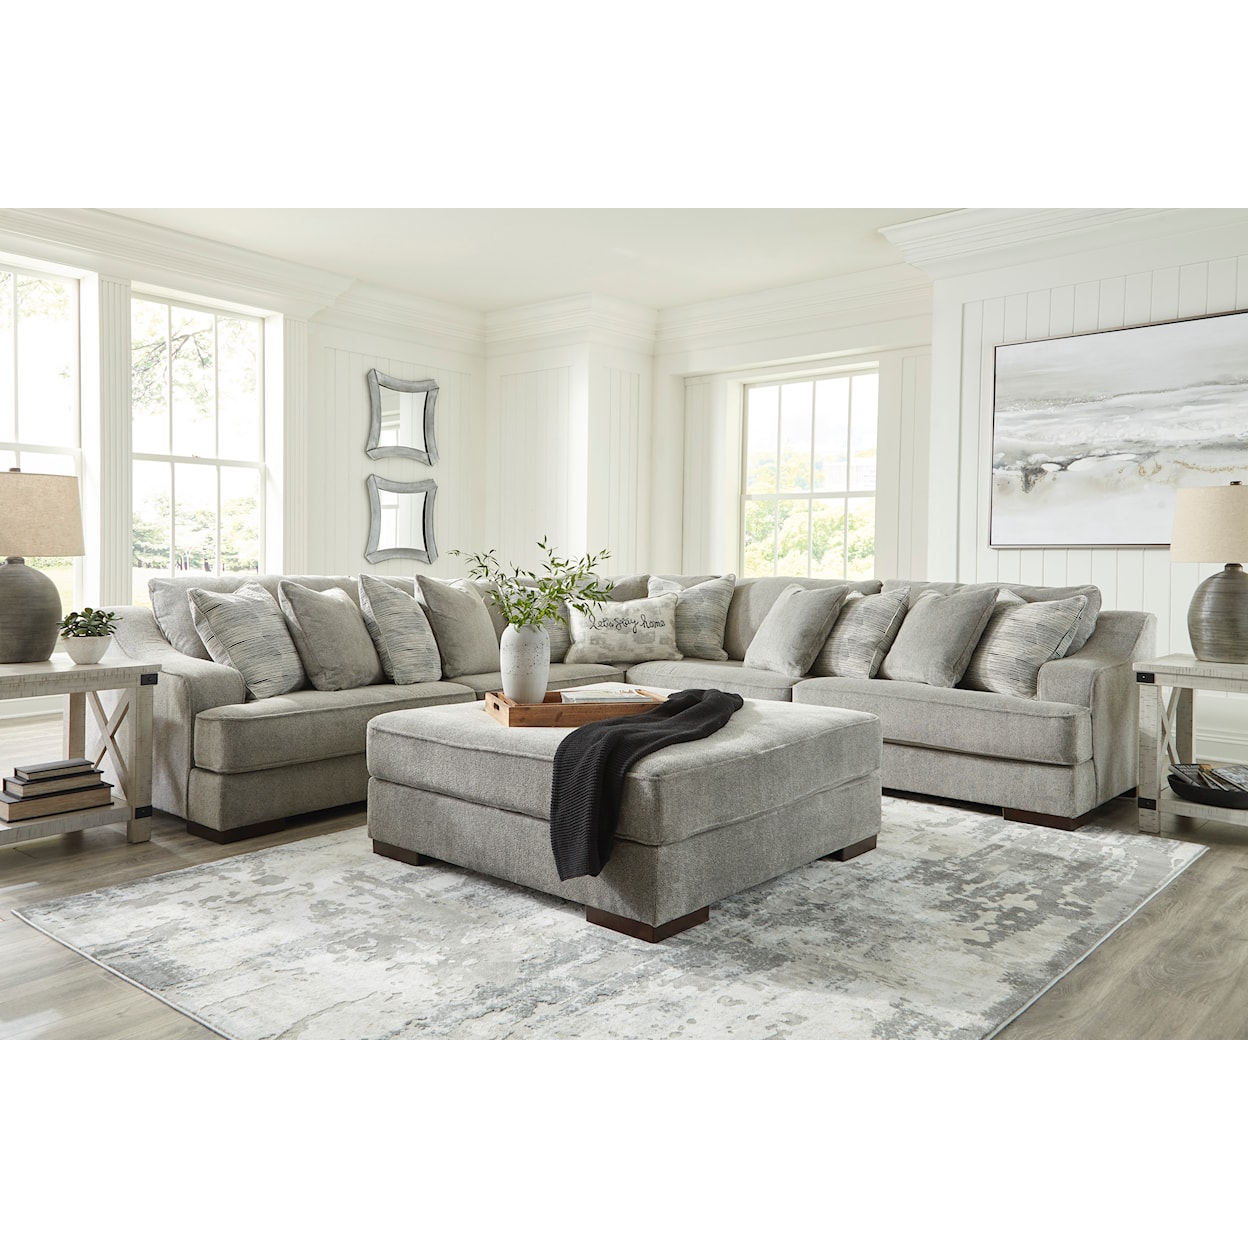 Signature Design by Ashley Bayless Oversized Accent Ottoman